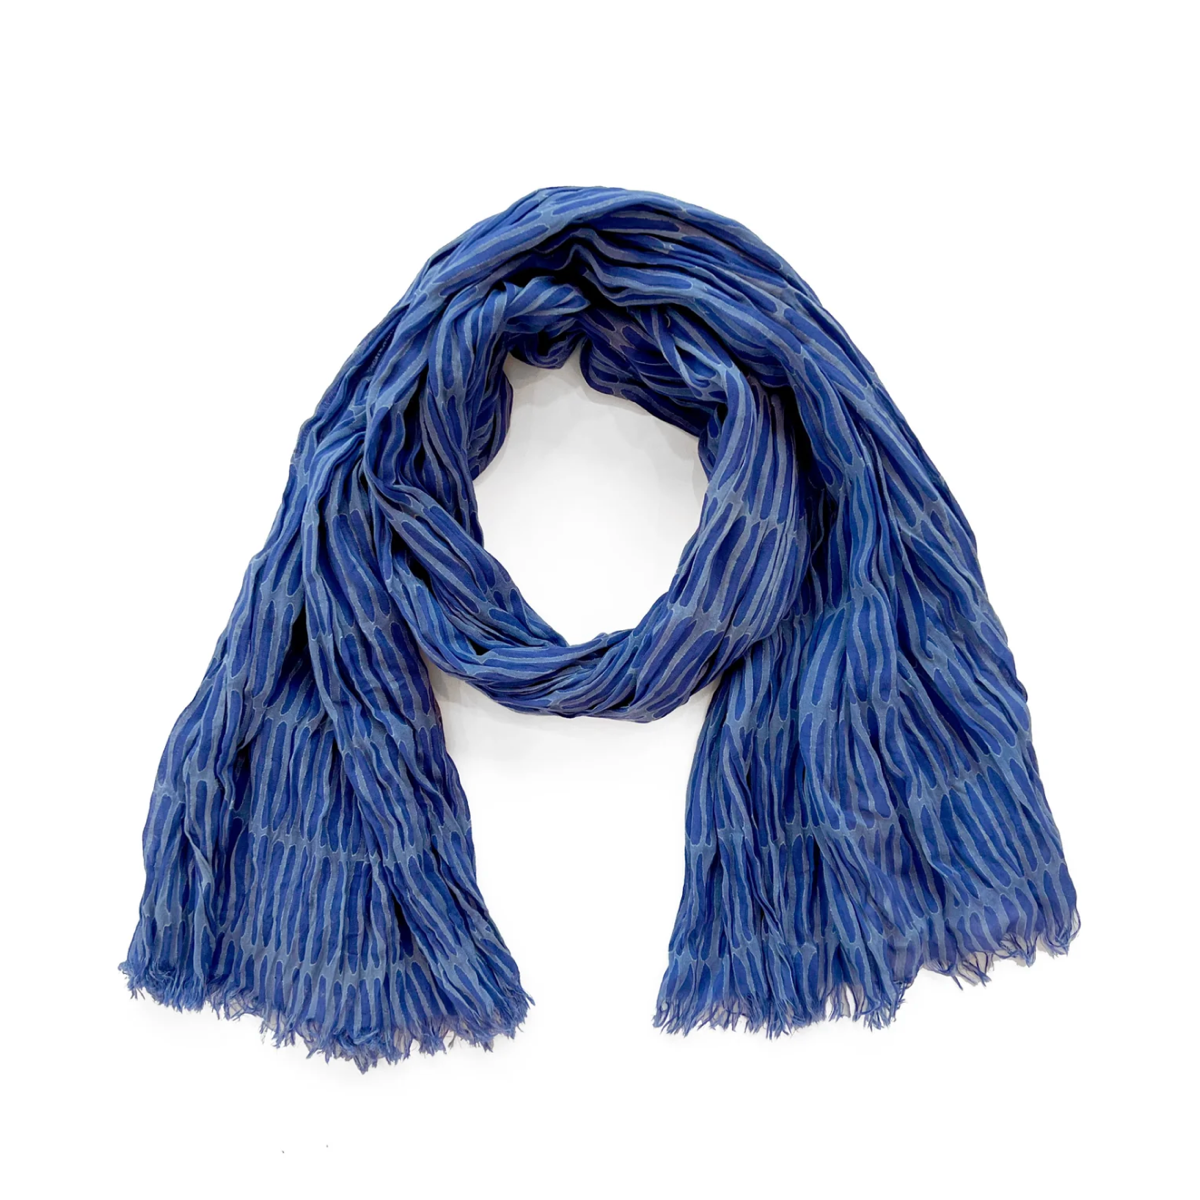 Big Basket cotton scarf in Blue/Periwinkle